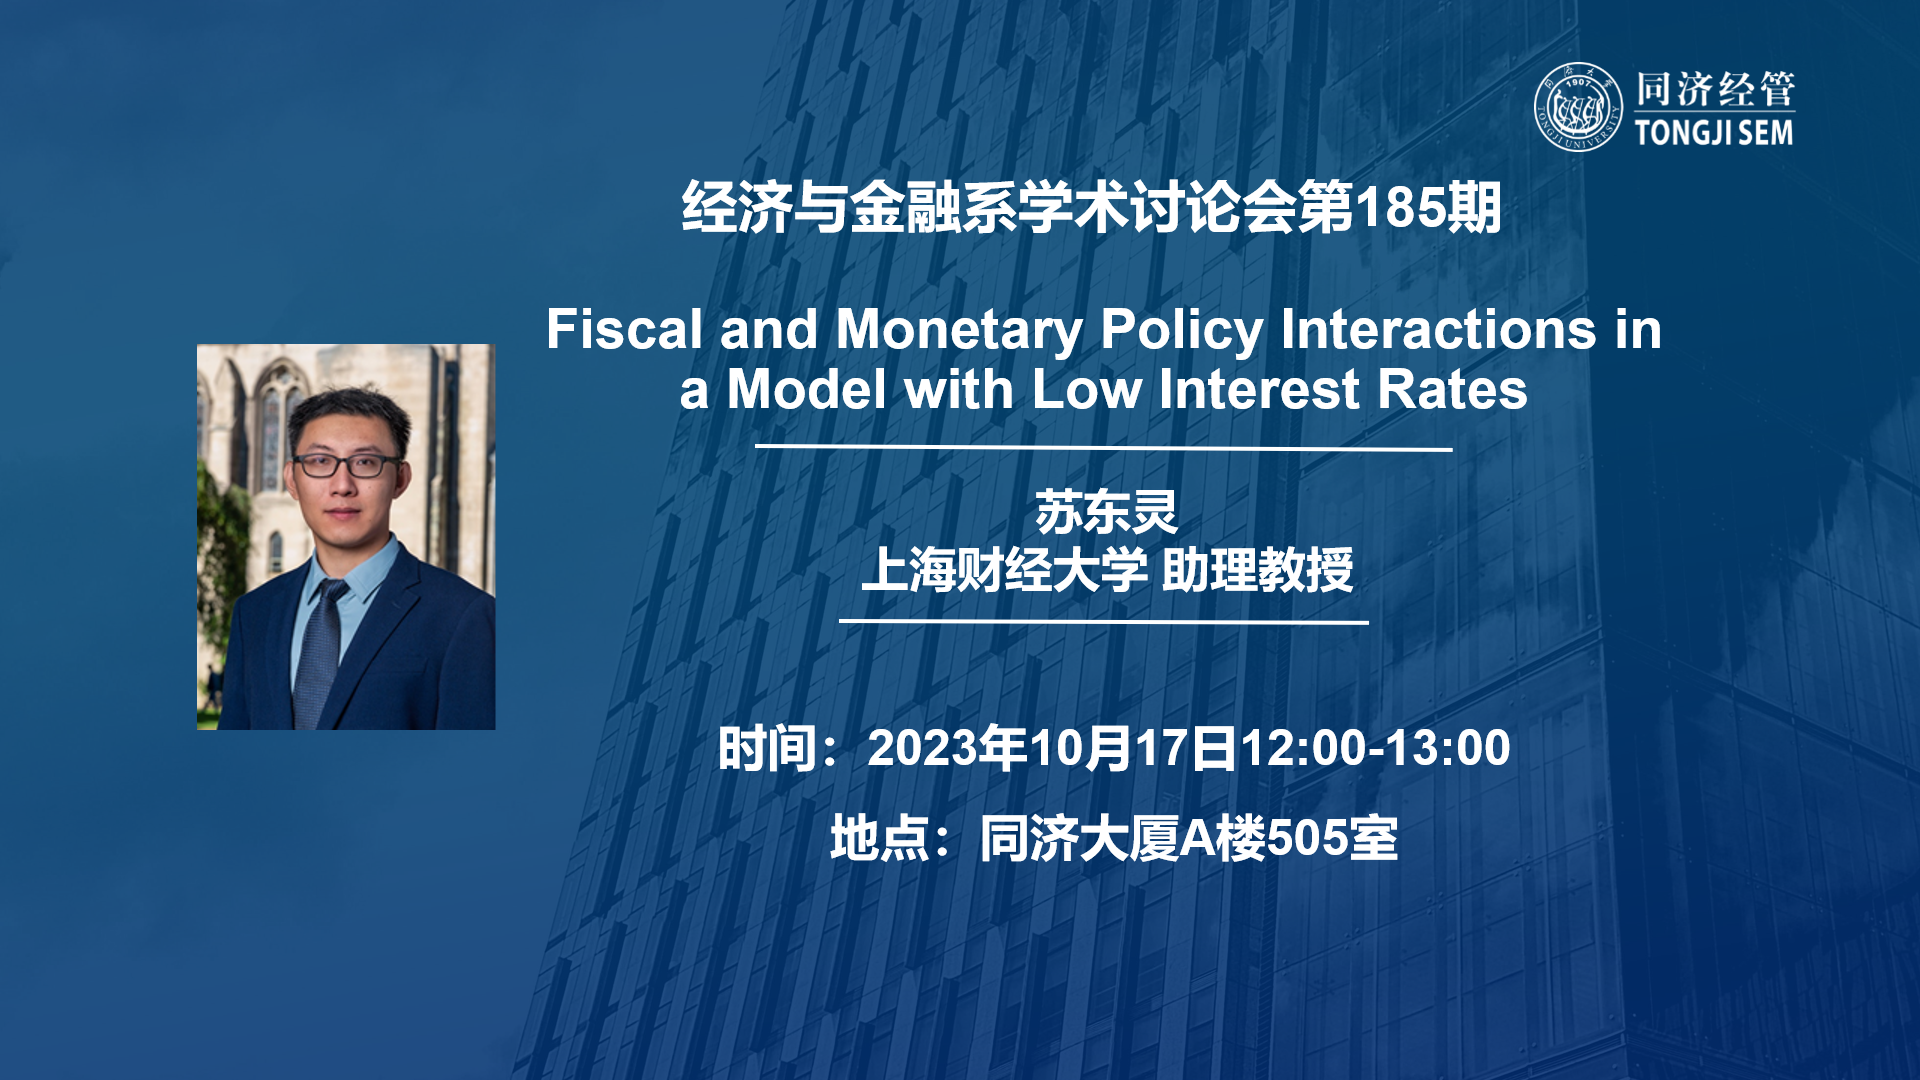 Fiscal and Monetary Policy Interactions in a Model with Low Interest Rates